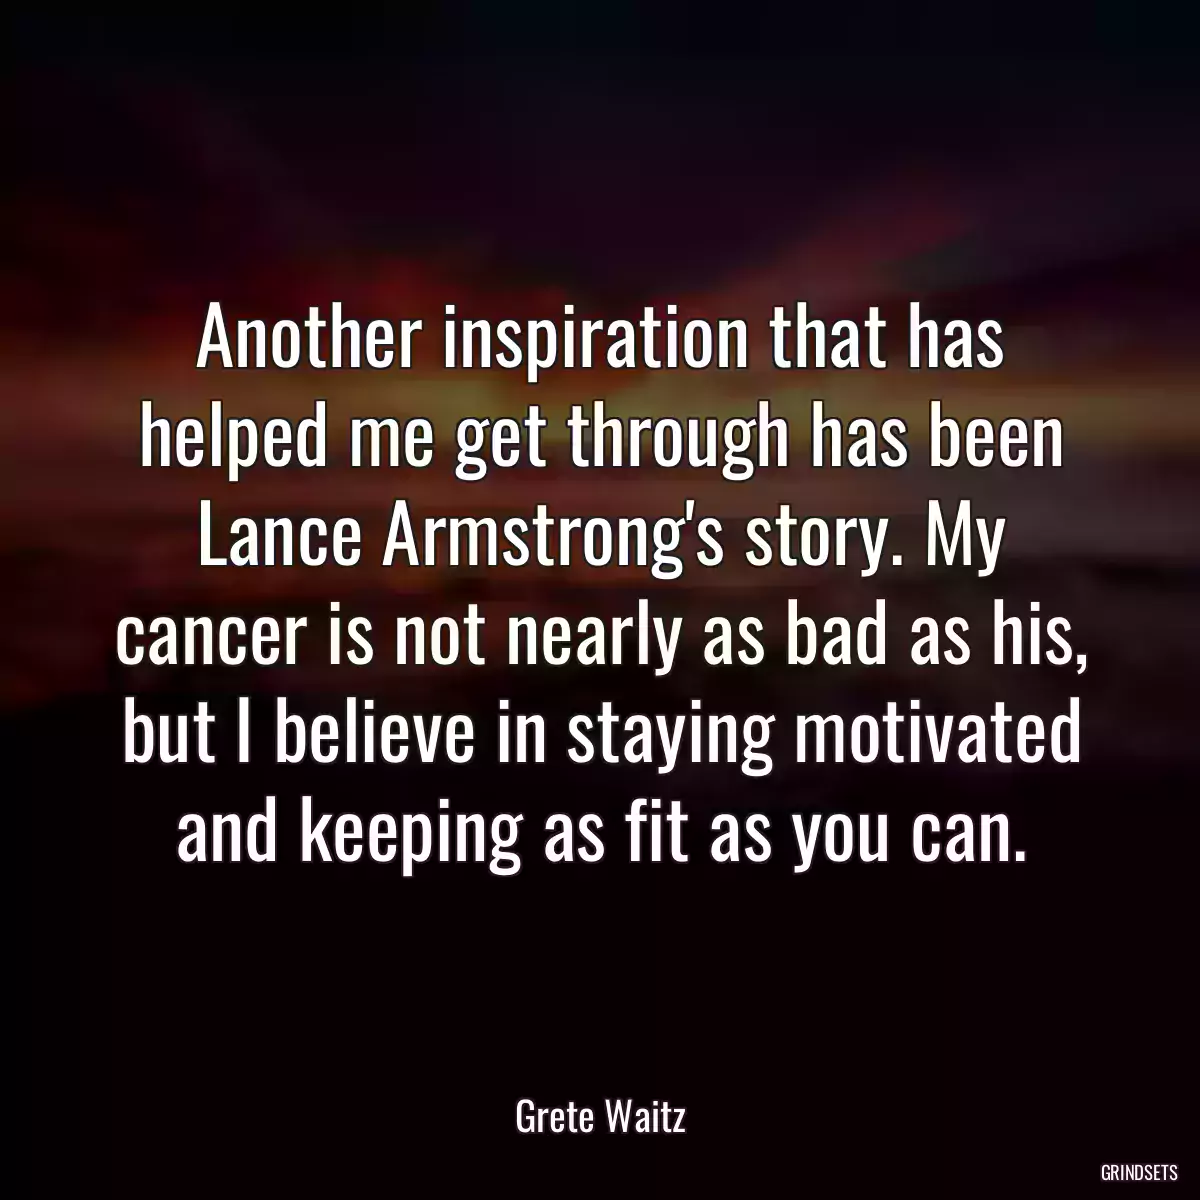 Another inspiration that has helped me get through has been Lance Armstrong\'s story. My cancer is not nearly as bad as his, but I believe in staying motivated and keeping as fit as you can.